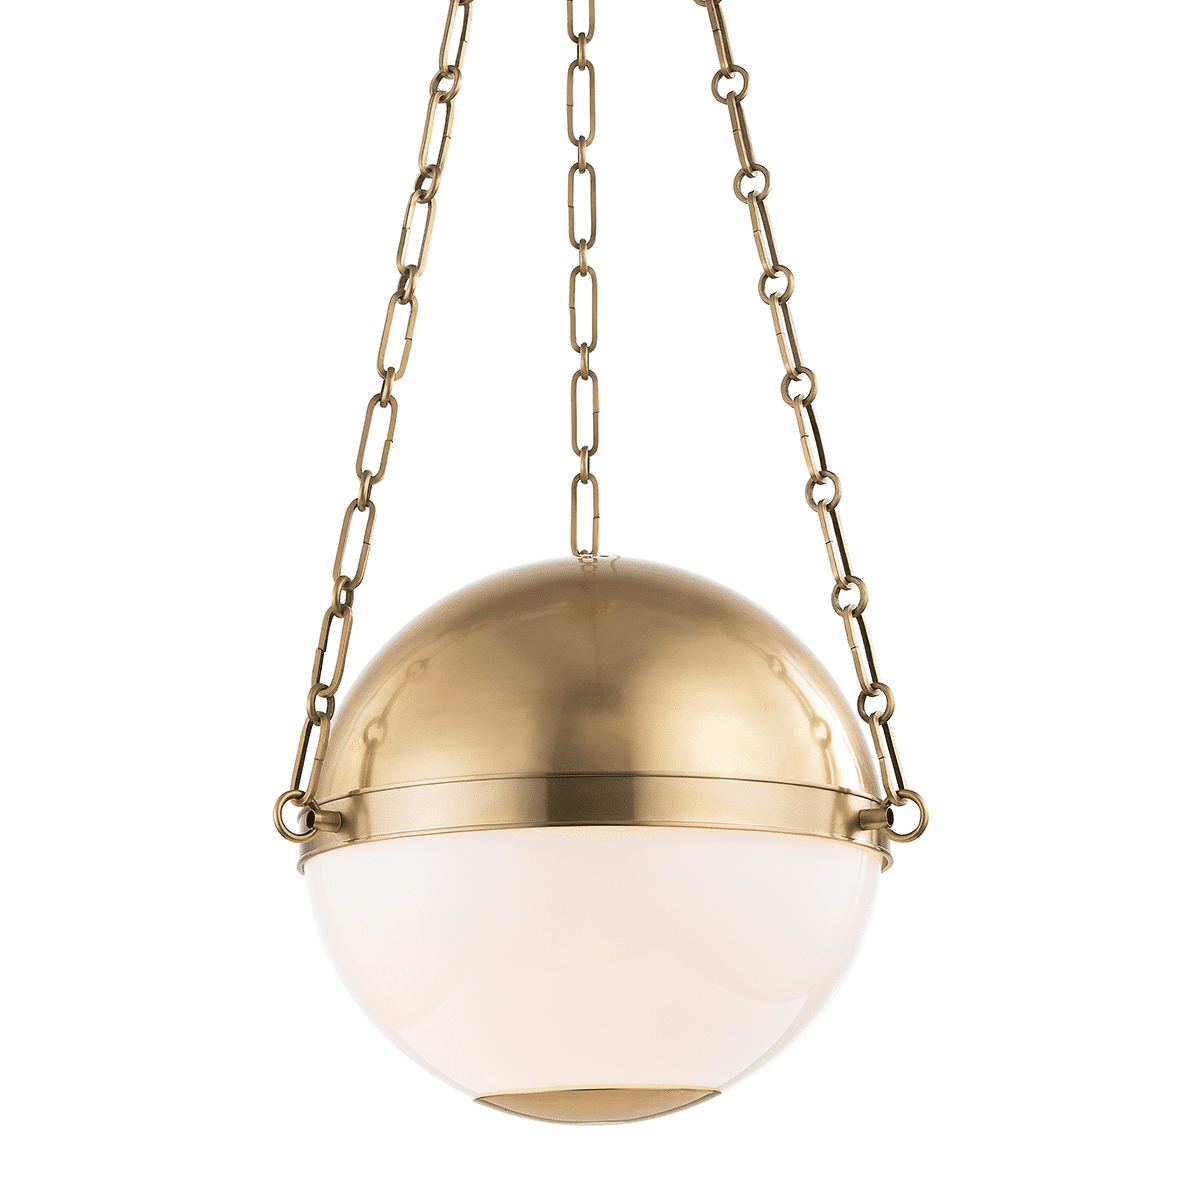 Taklampa Sphere No.2 2 Light Small Taklampa (Aged brass) (MDS750-AGB-CE)